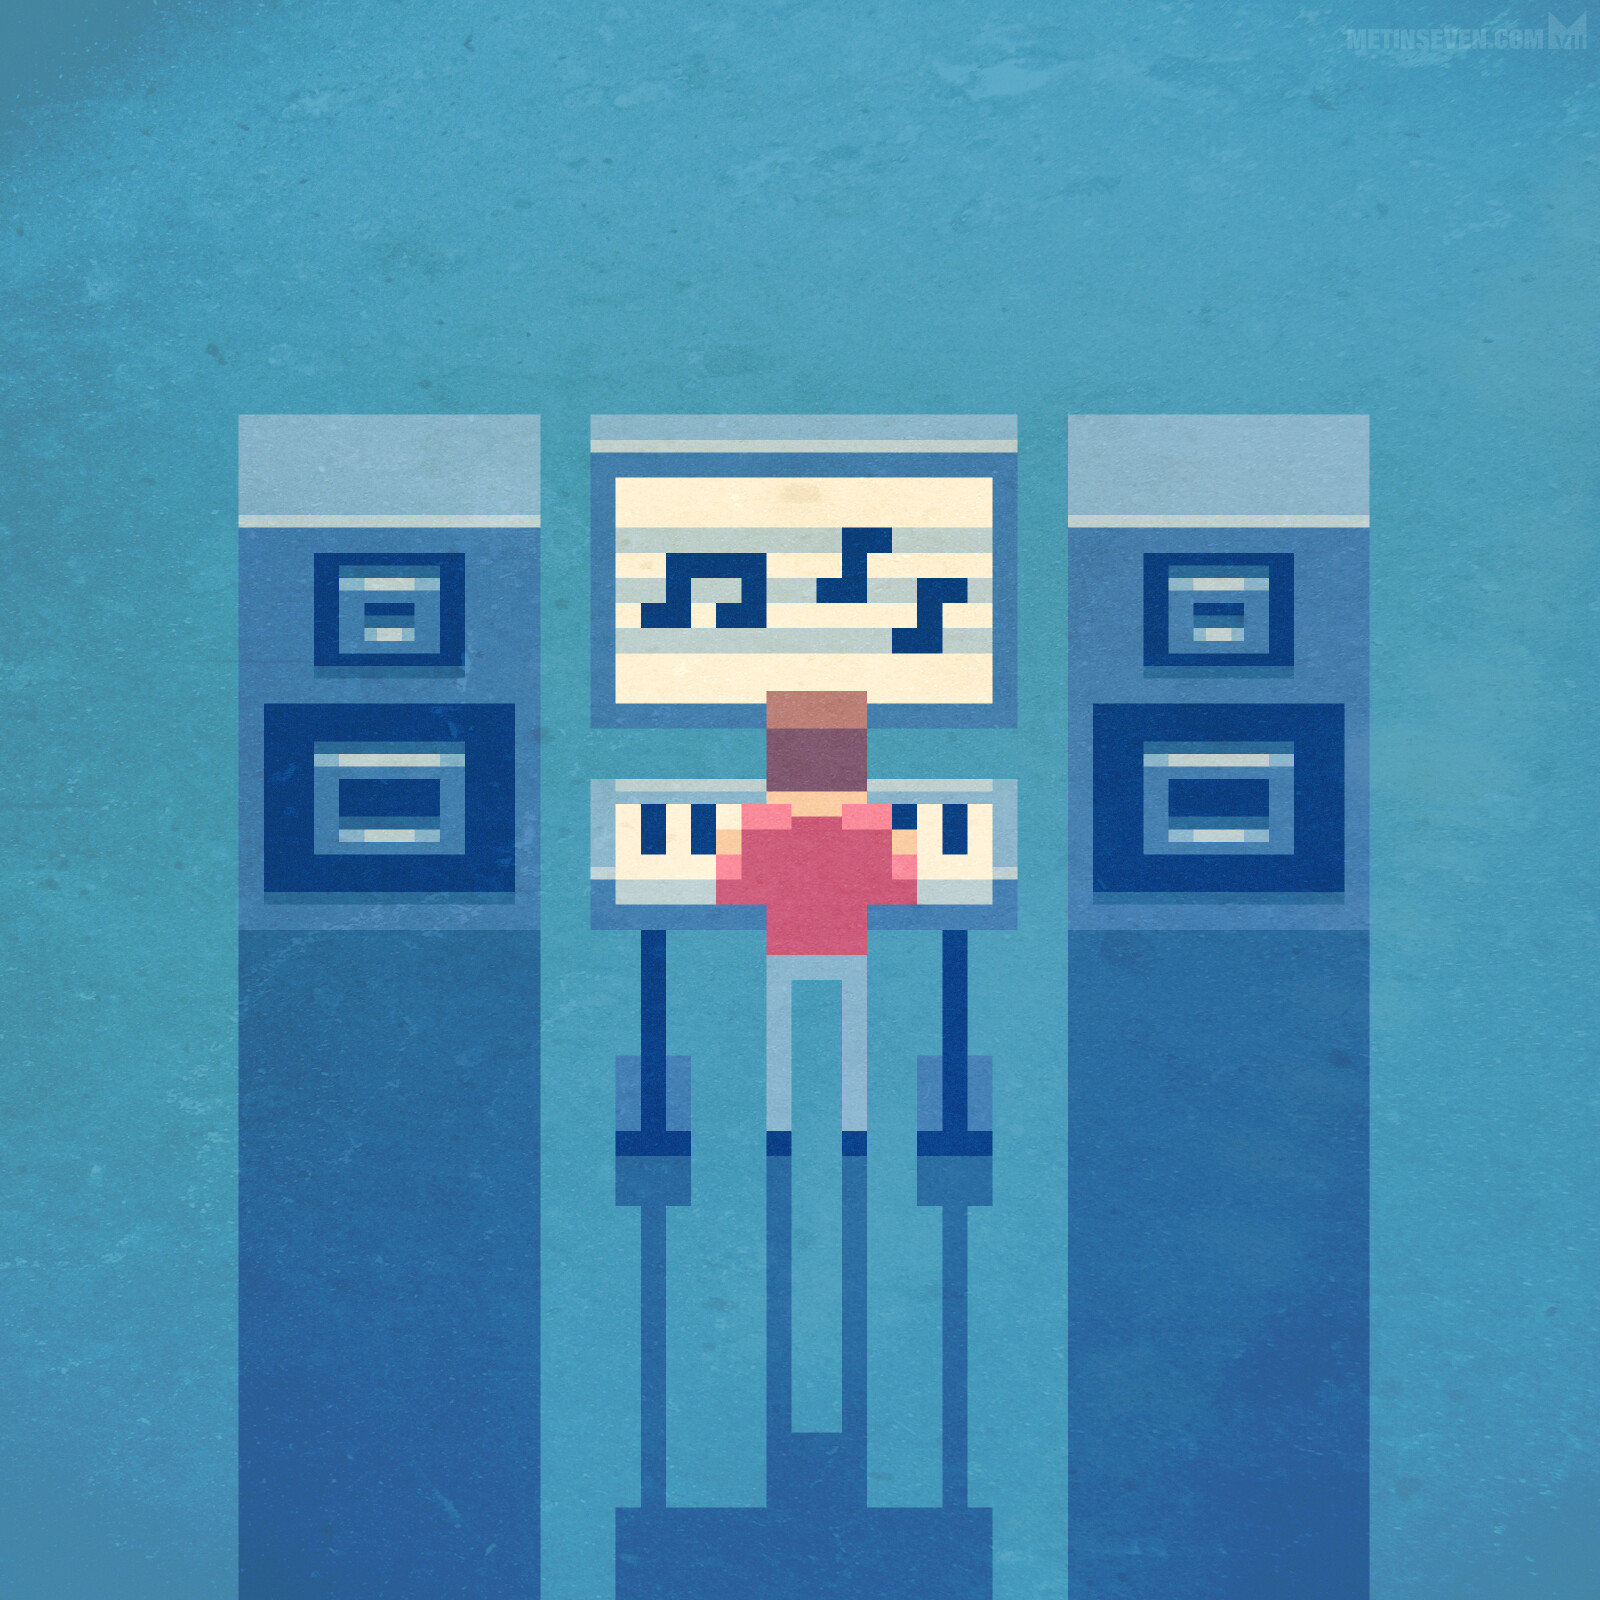 Electronic musician, orthographic top-view pixel artwork